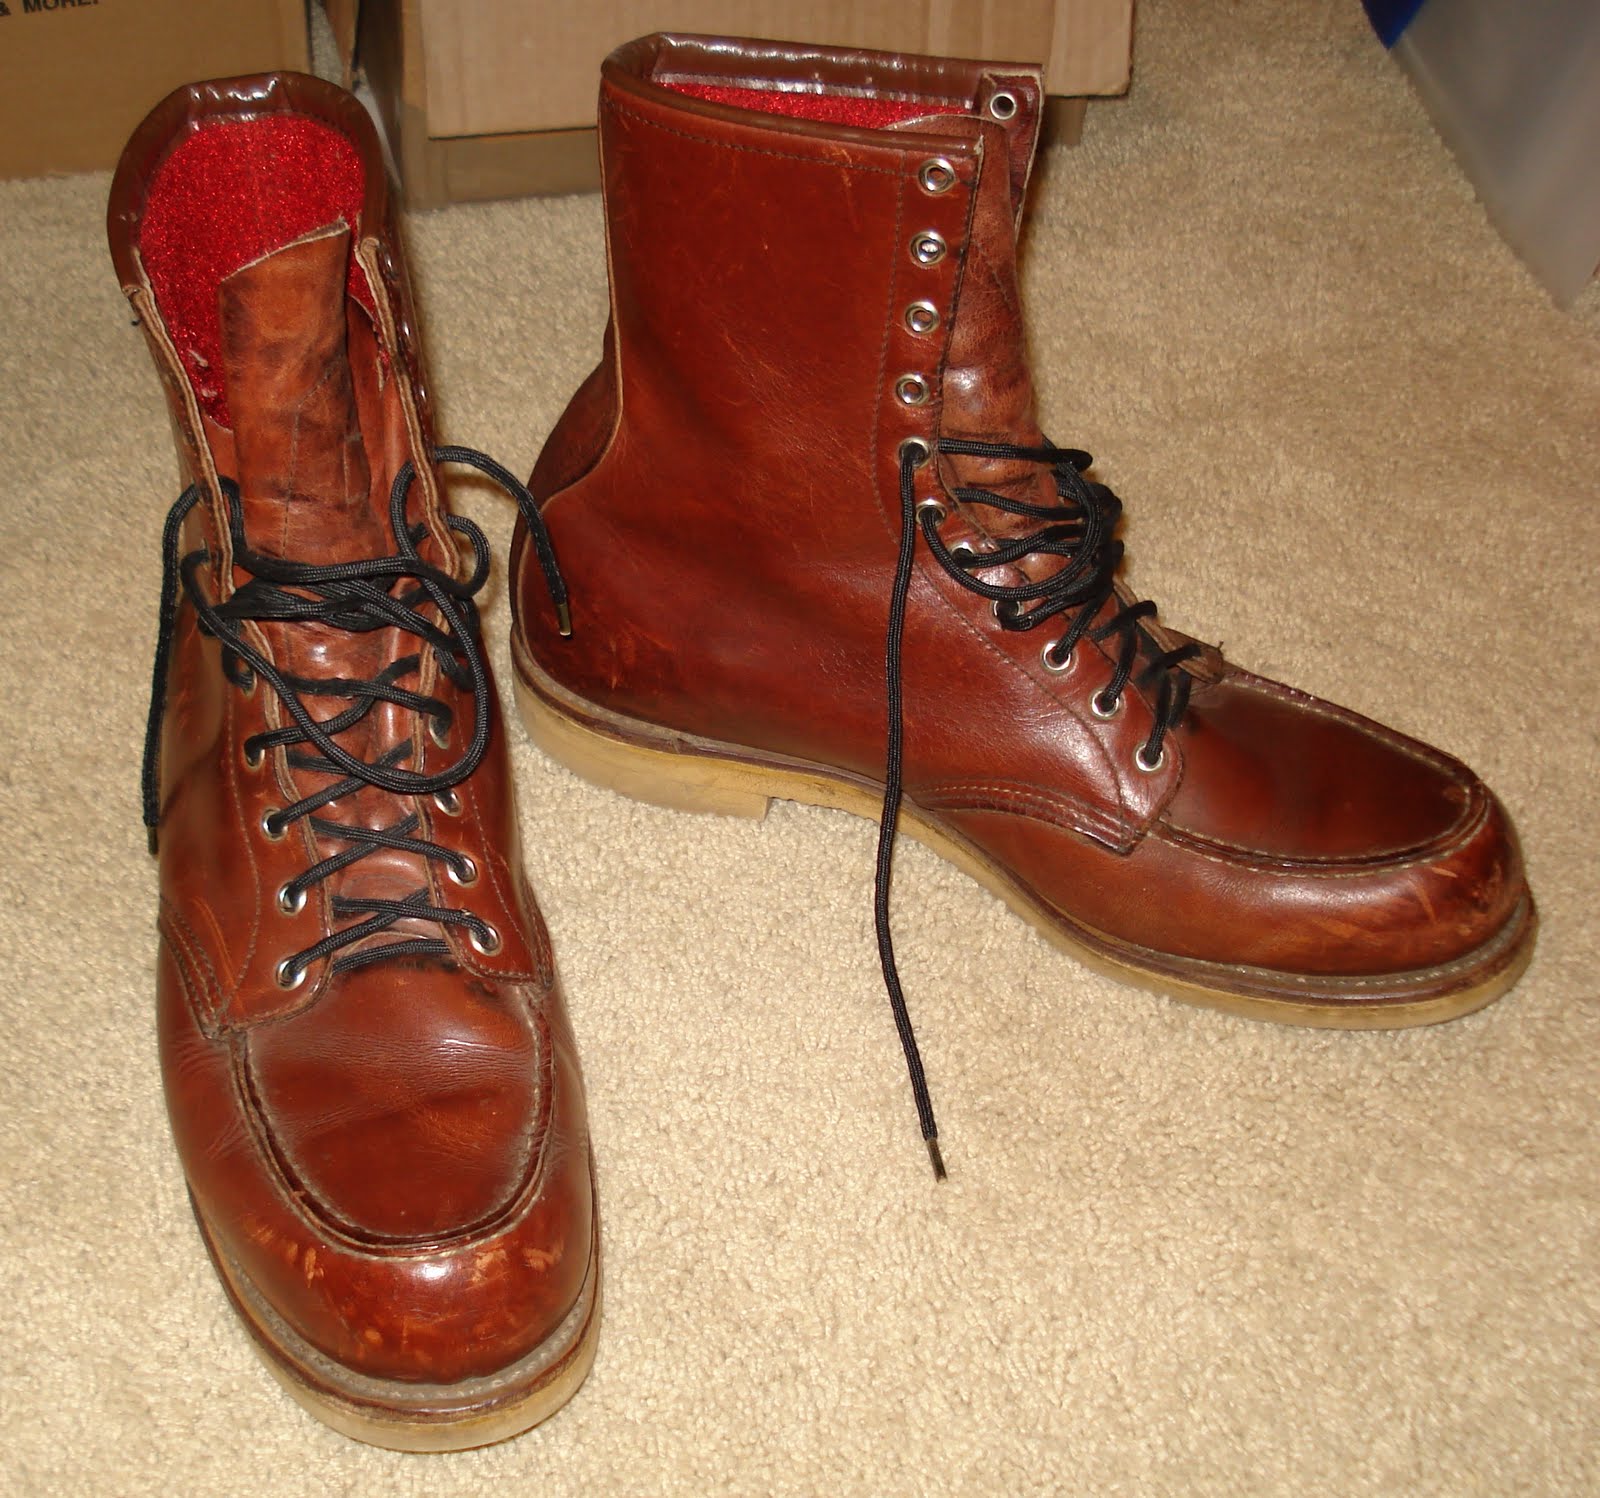 Nostalgia on Wheels: 1974+ Red Wing Boots